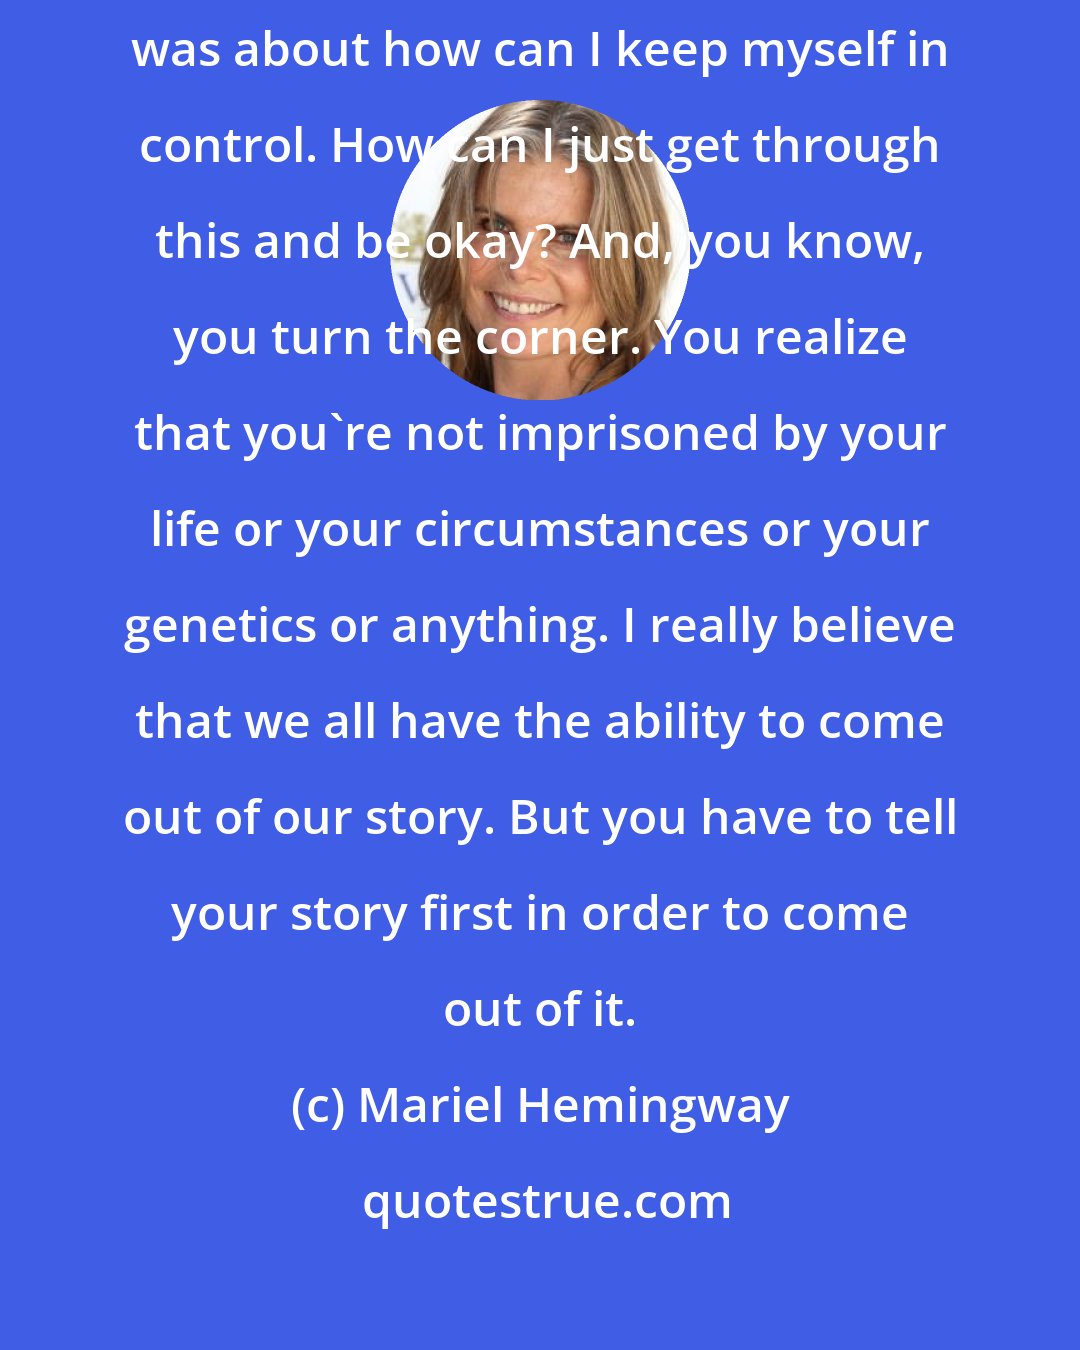 Mariel Hemingway: In old interviews I was still worried about being judged. I think my life was about how can I keep myself in control. How can I just get through this and be okay? And, you know, you turn the corner. You realize that you're not imprisoned by your life or your circumstances or your genetics or anything. I really believe that we all have the ability to come out of our story. But you have to tell your story first in order to come out of it.